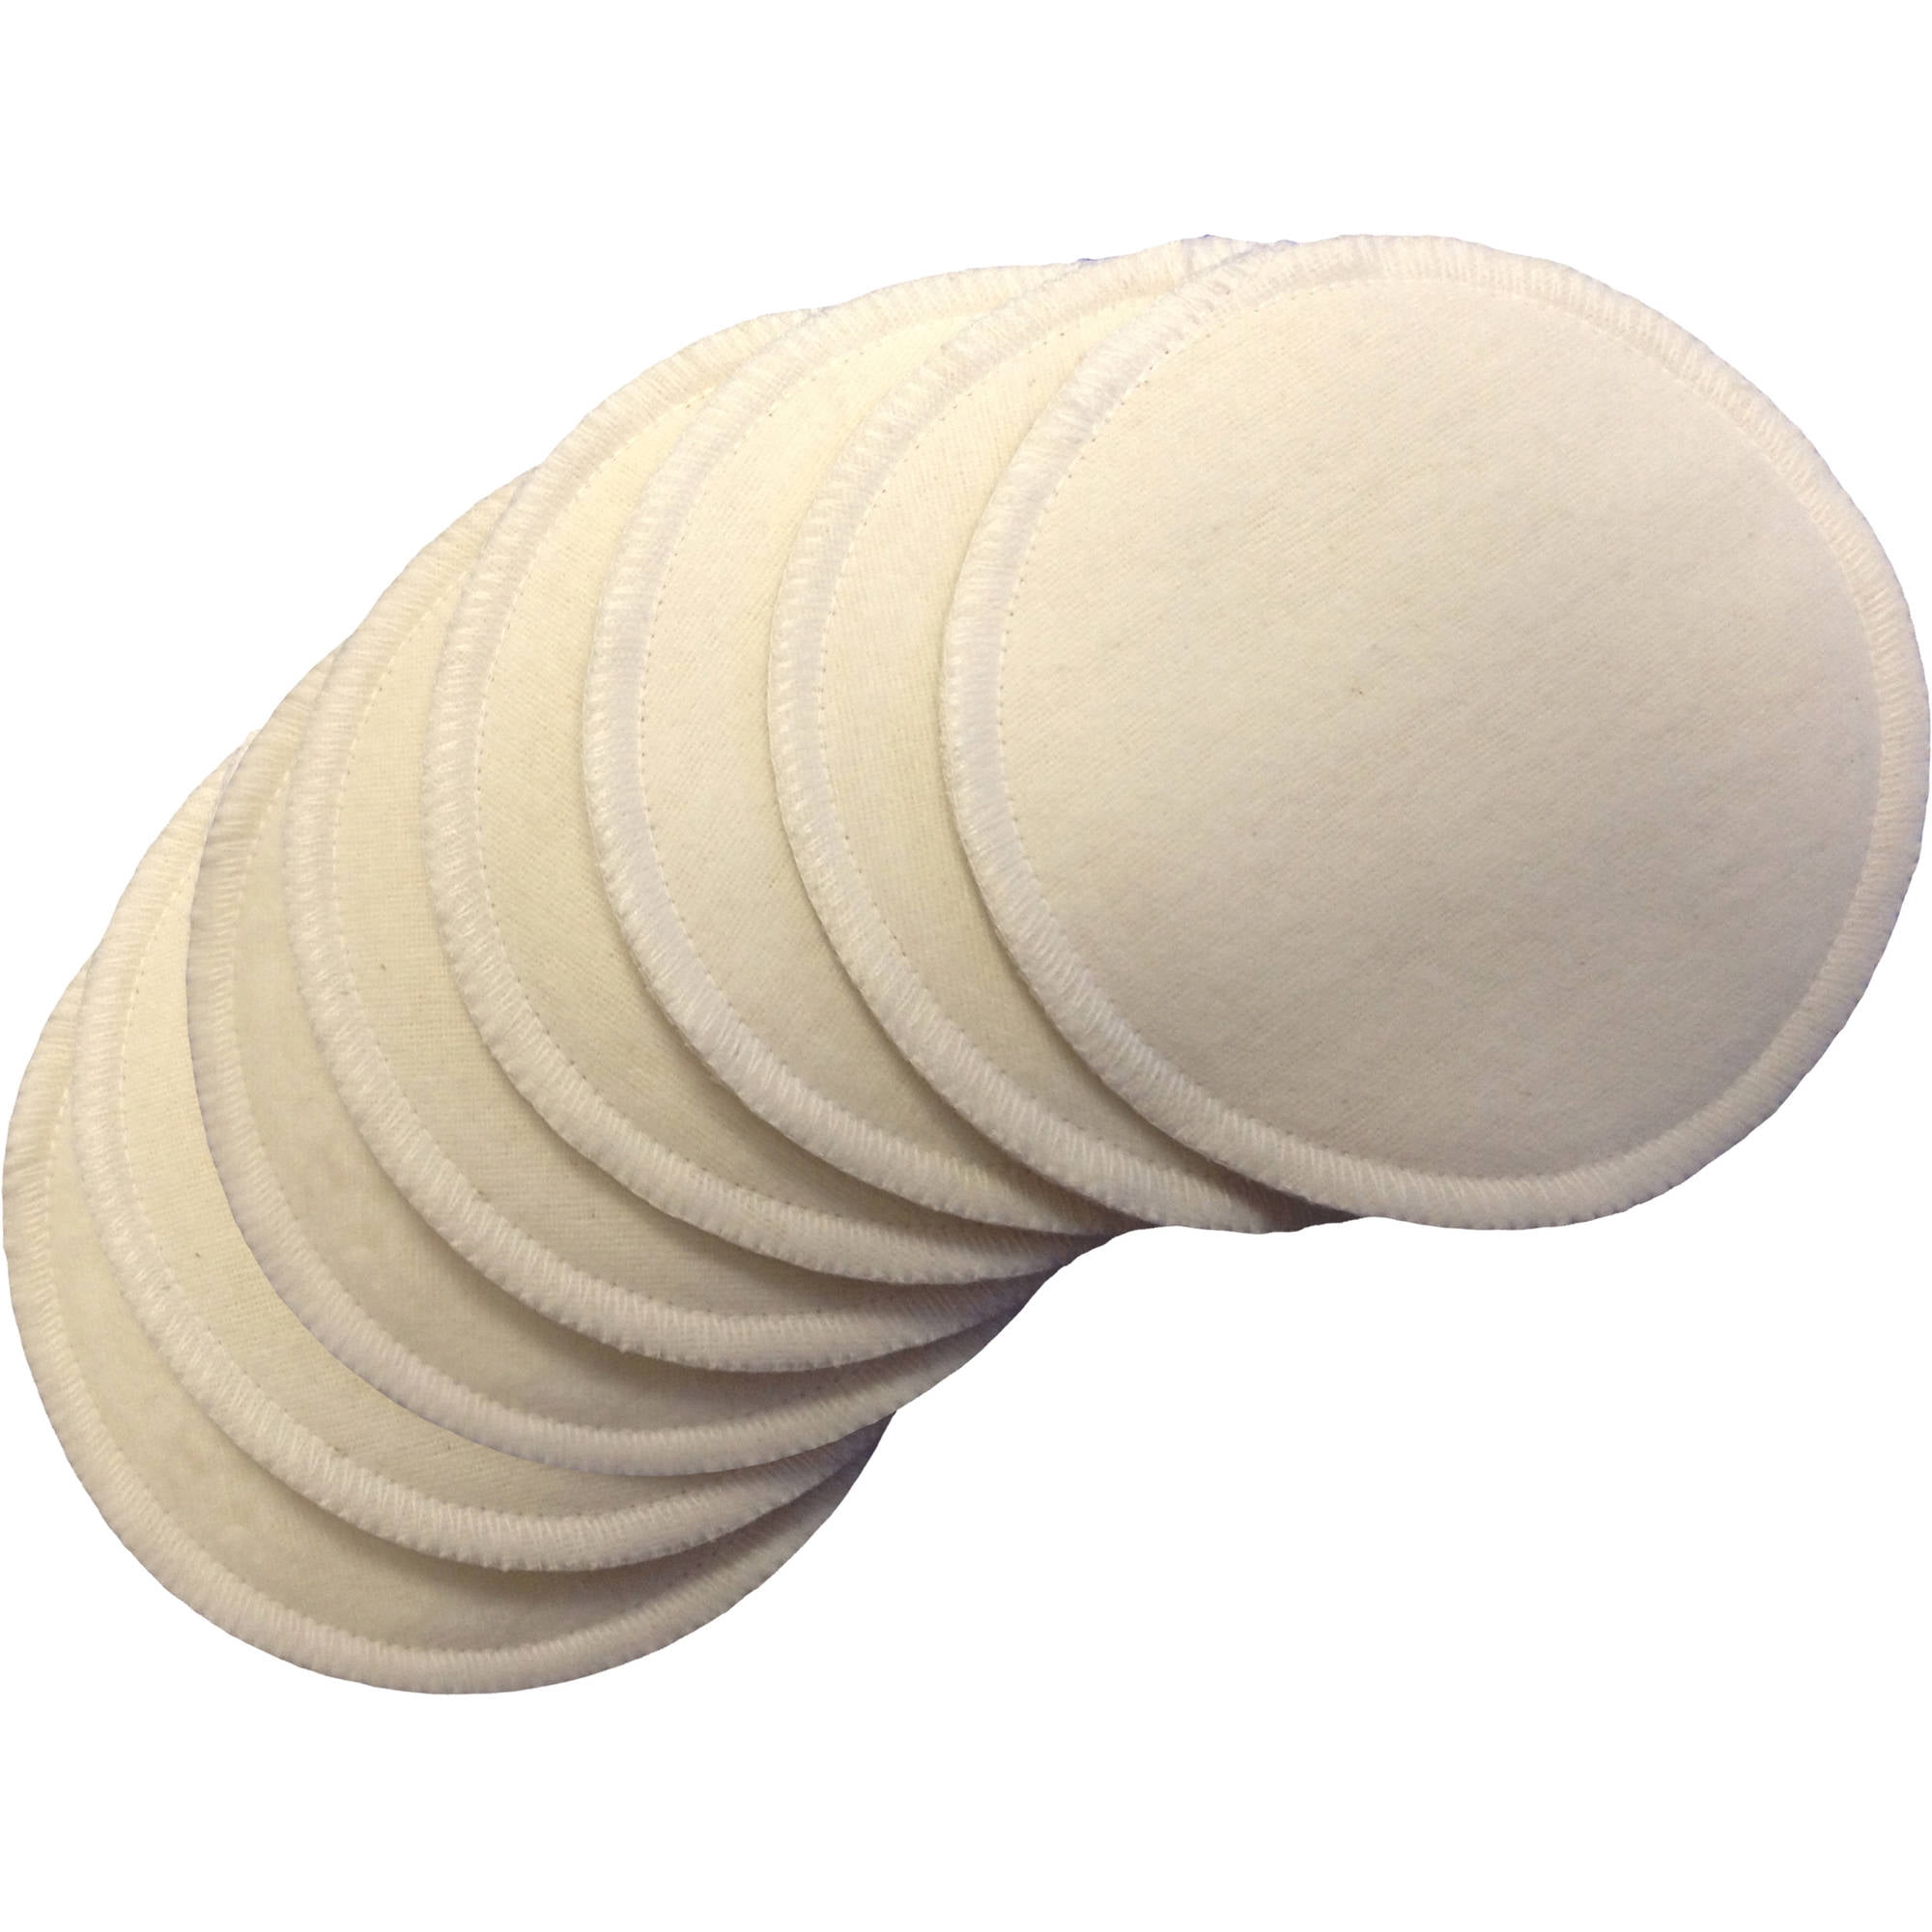 Curity Maternity Disposable Nursing Pads - Shop All